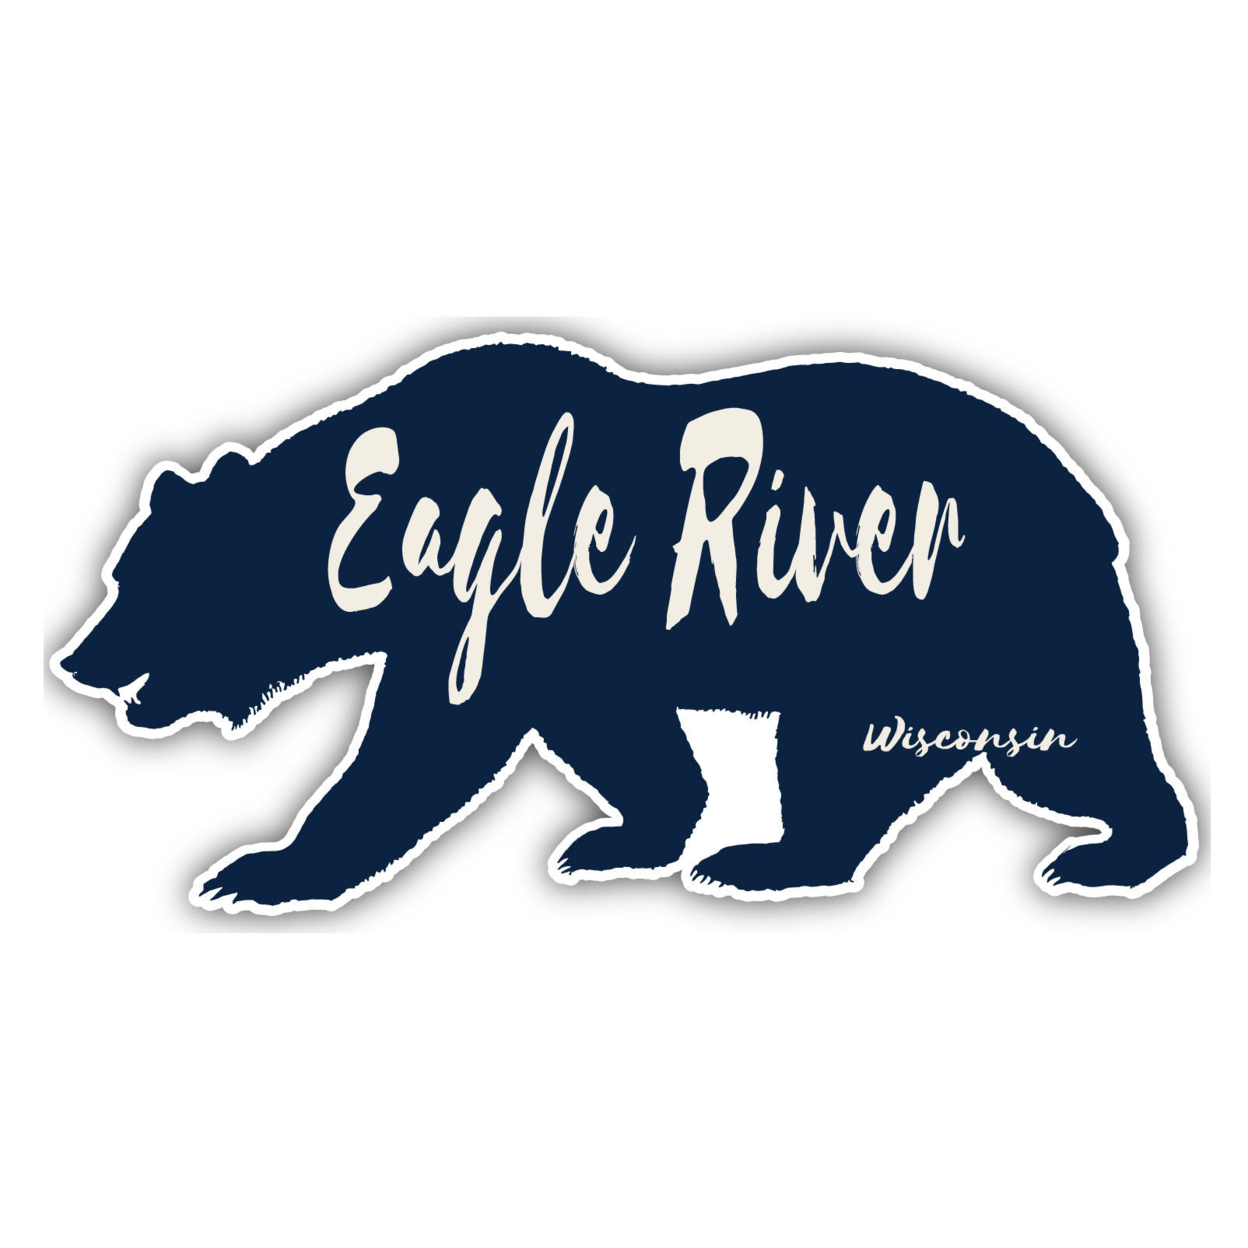 Eagle River Wisconsin Souvenir Decorative Stickers (Choose Theme And Size) - 4-Pack, 8-Inch, Bear